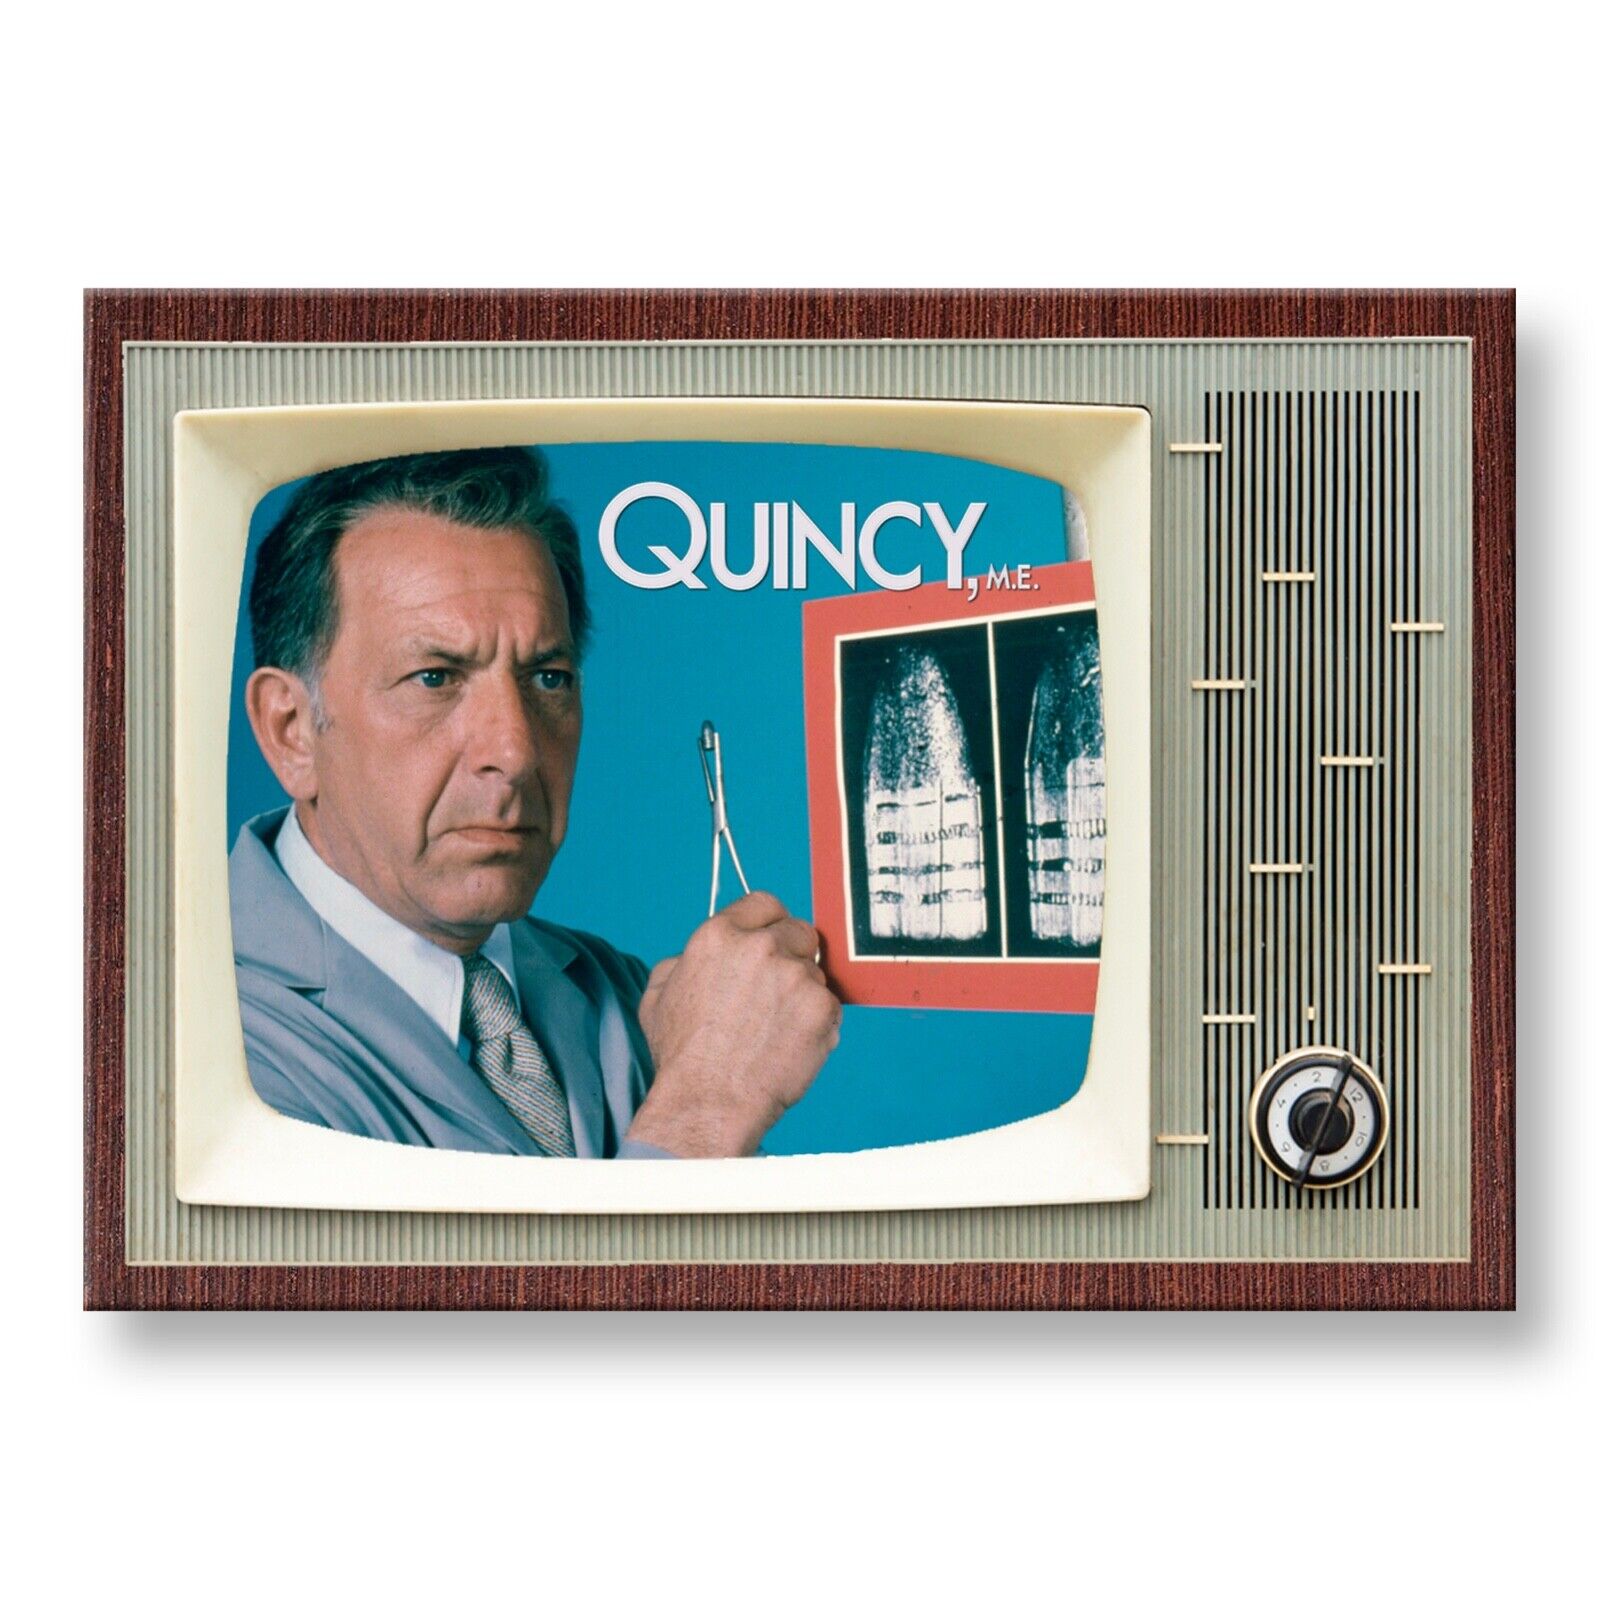 Quincy ME TV Show Classic TV 3.5 inches x 2.5 inches Steel Fridge Magnet